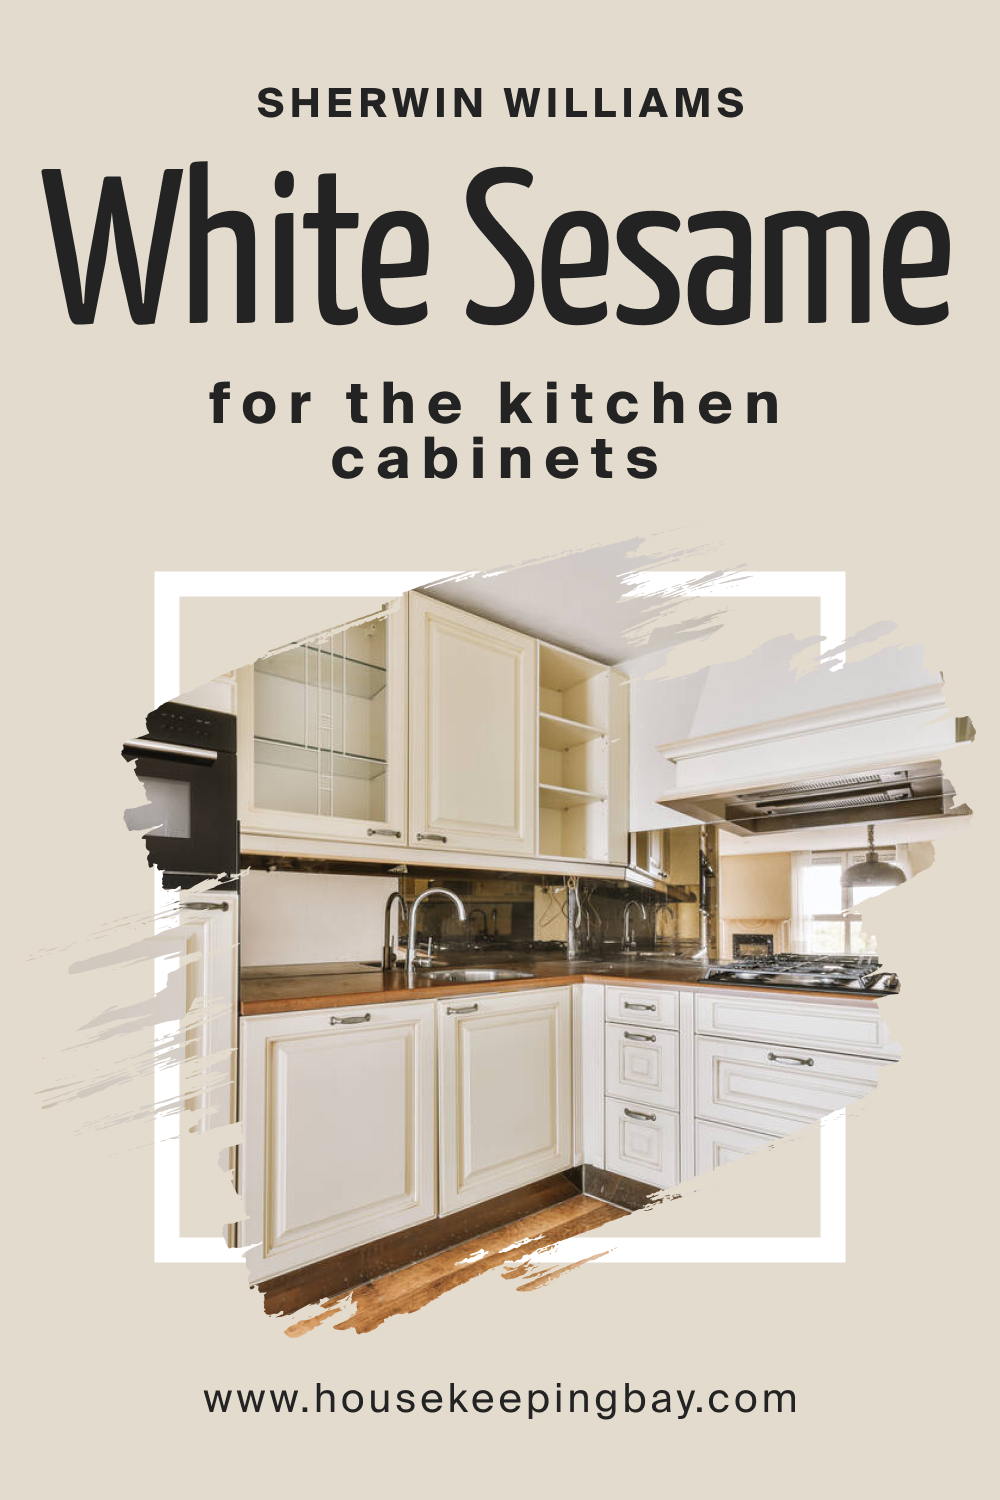 Sherwin Williams. SW 9586 White Sesame For the Kitchen Cabinets